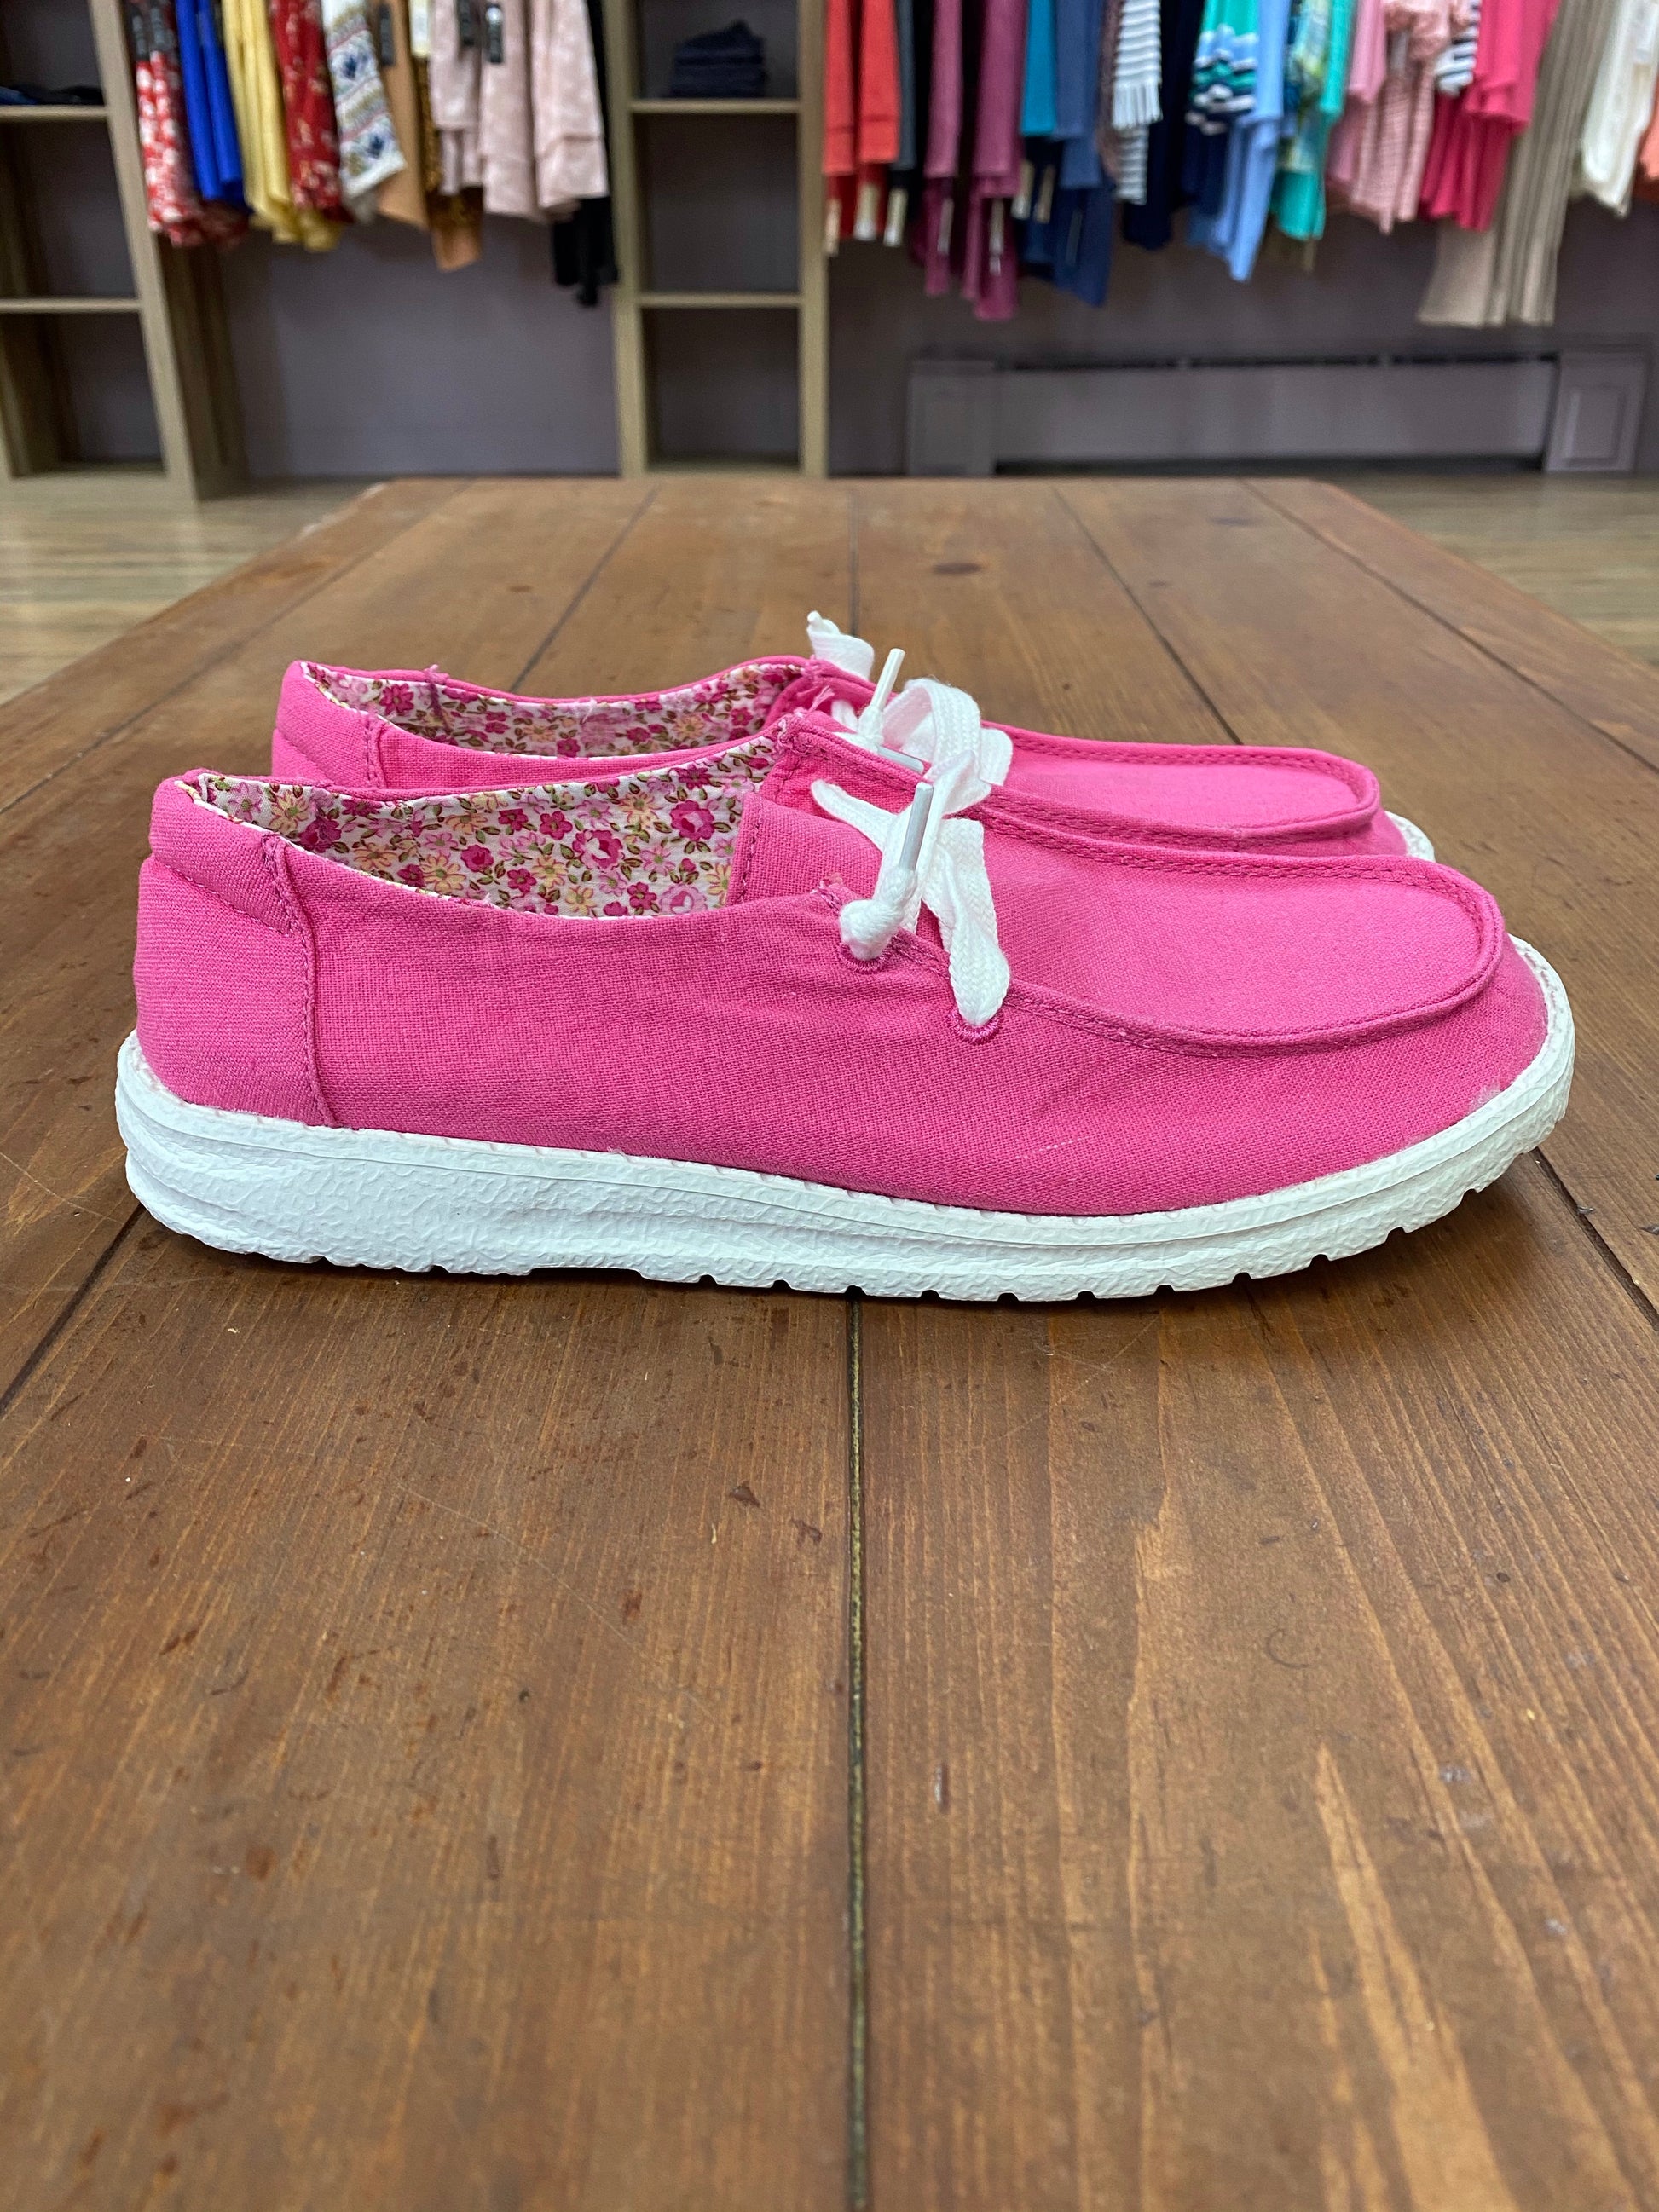 Gypsy Jazz Holly Pink Sneakers - Whitt & Co. Clothing